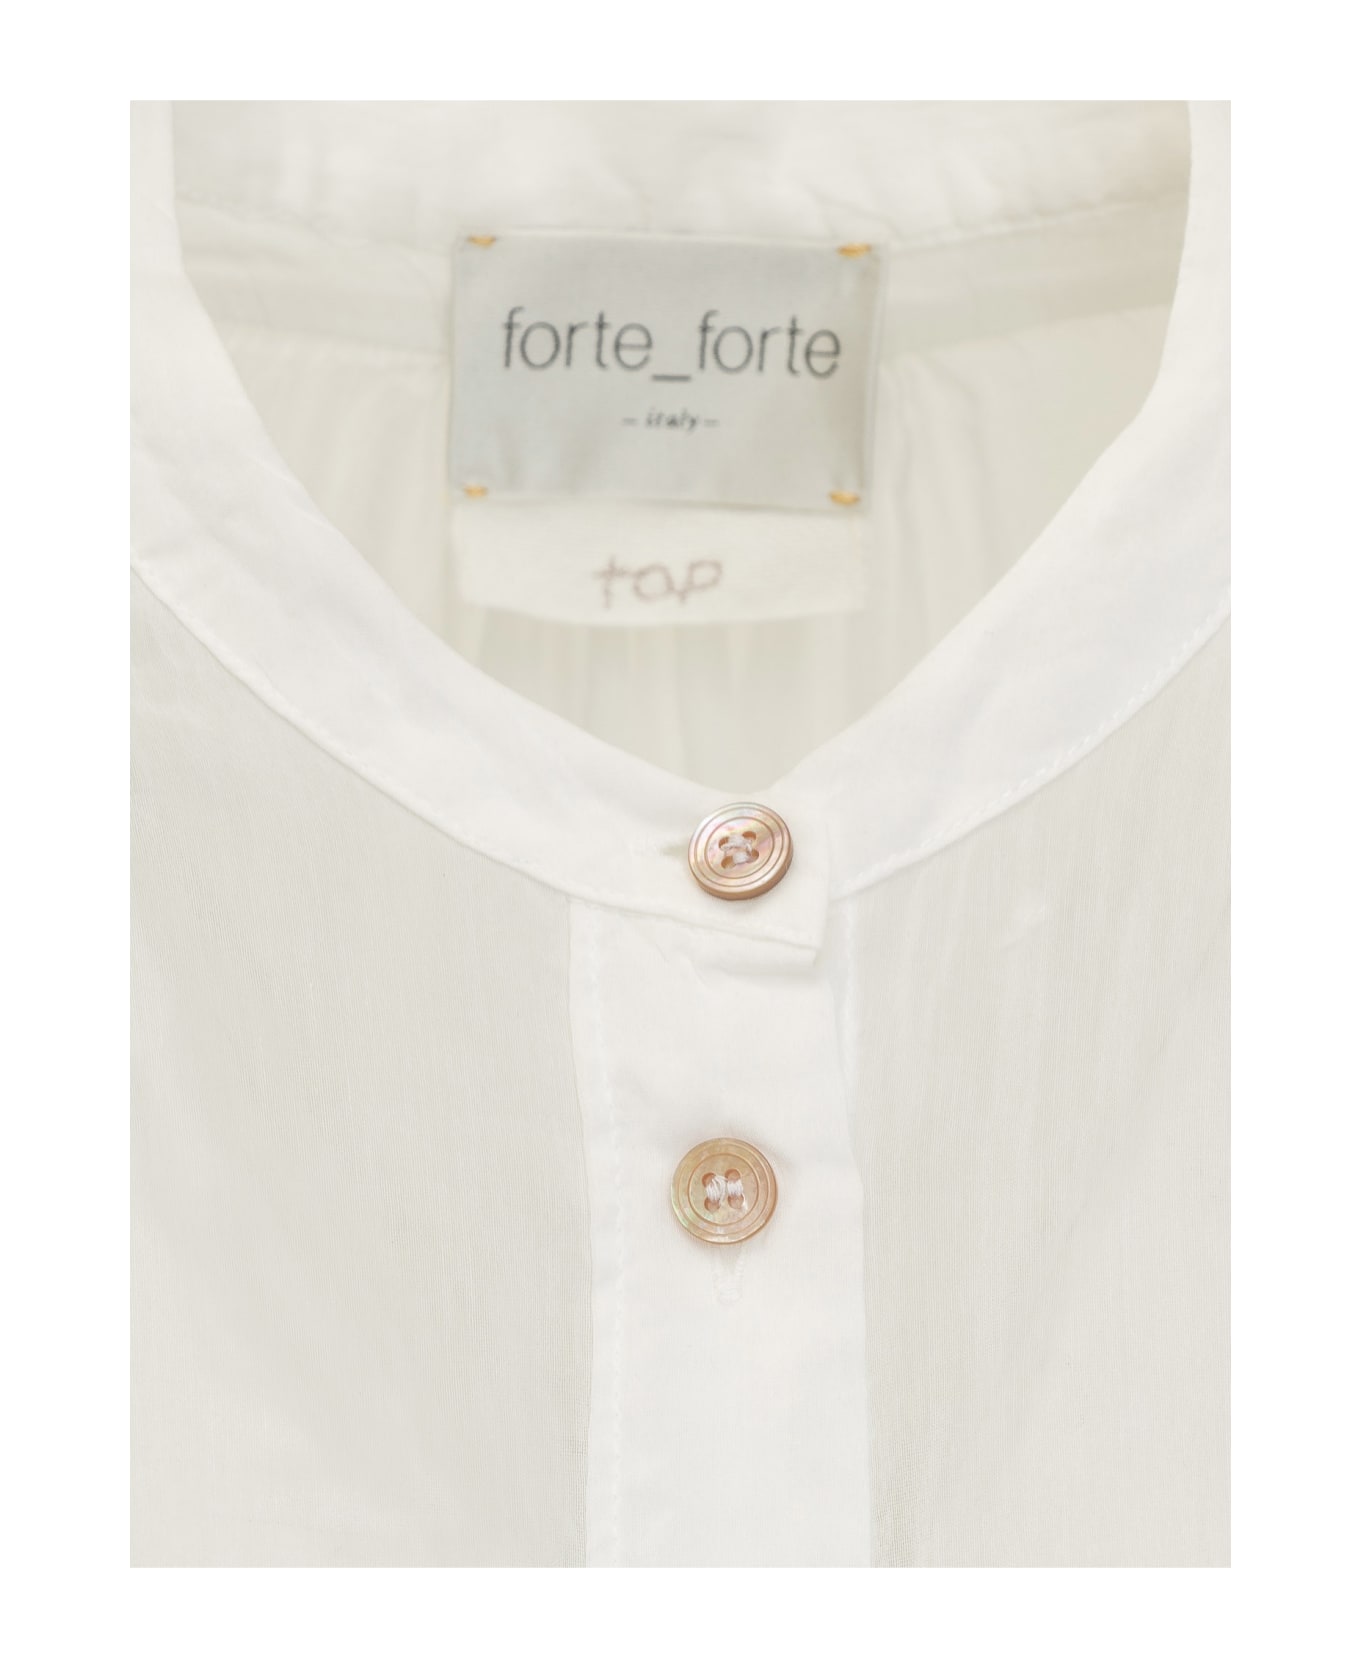 Forte_Forte Top - WHITE トップス